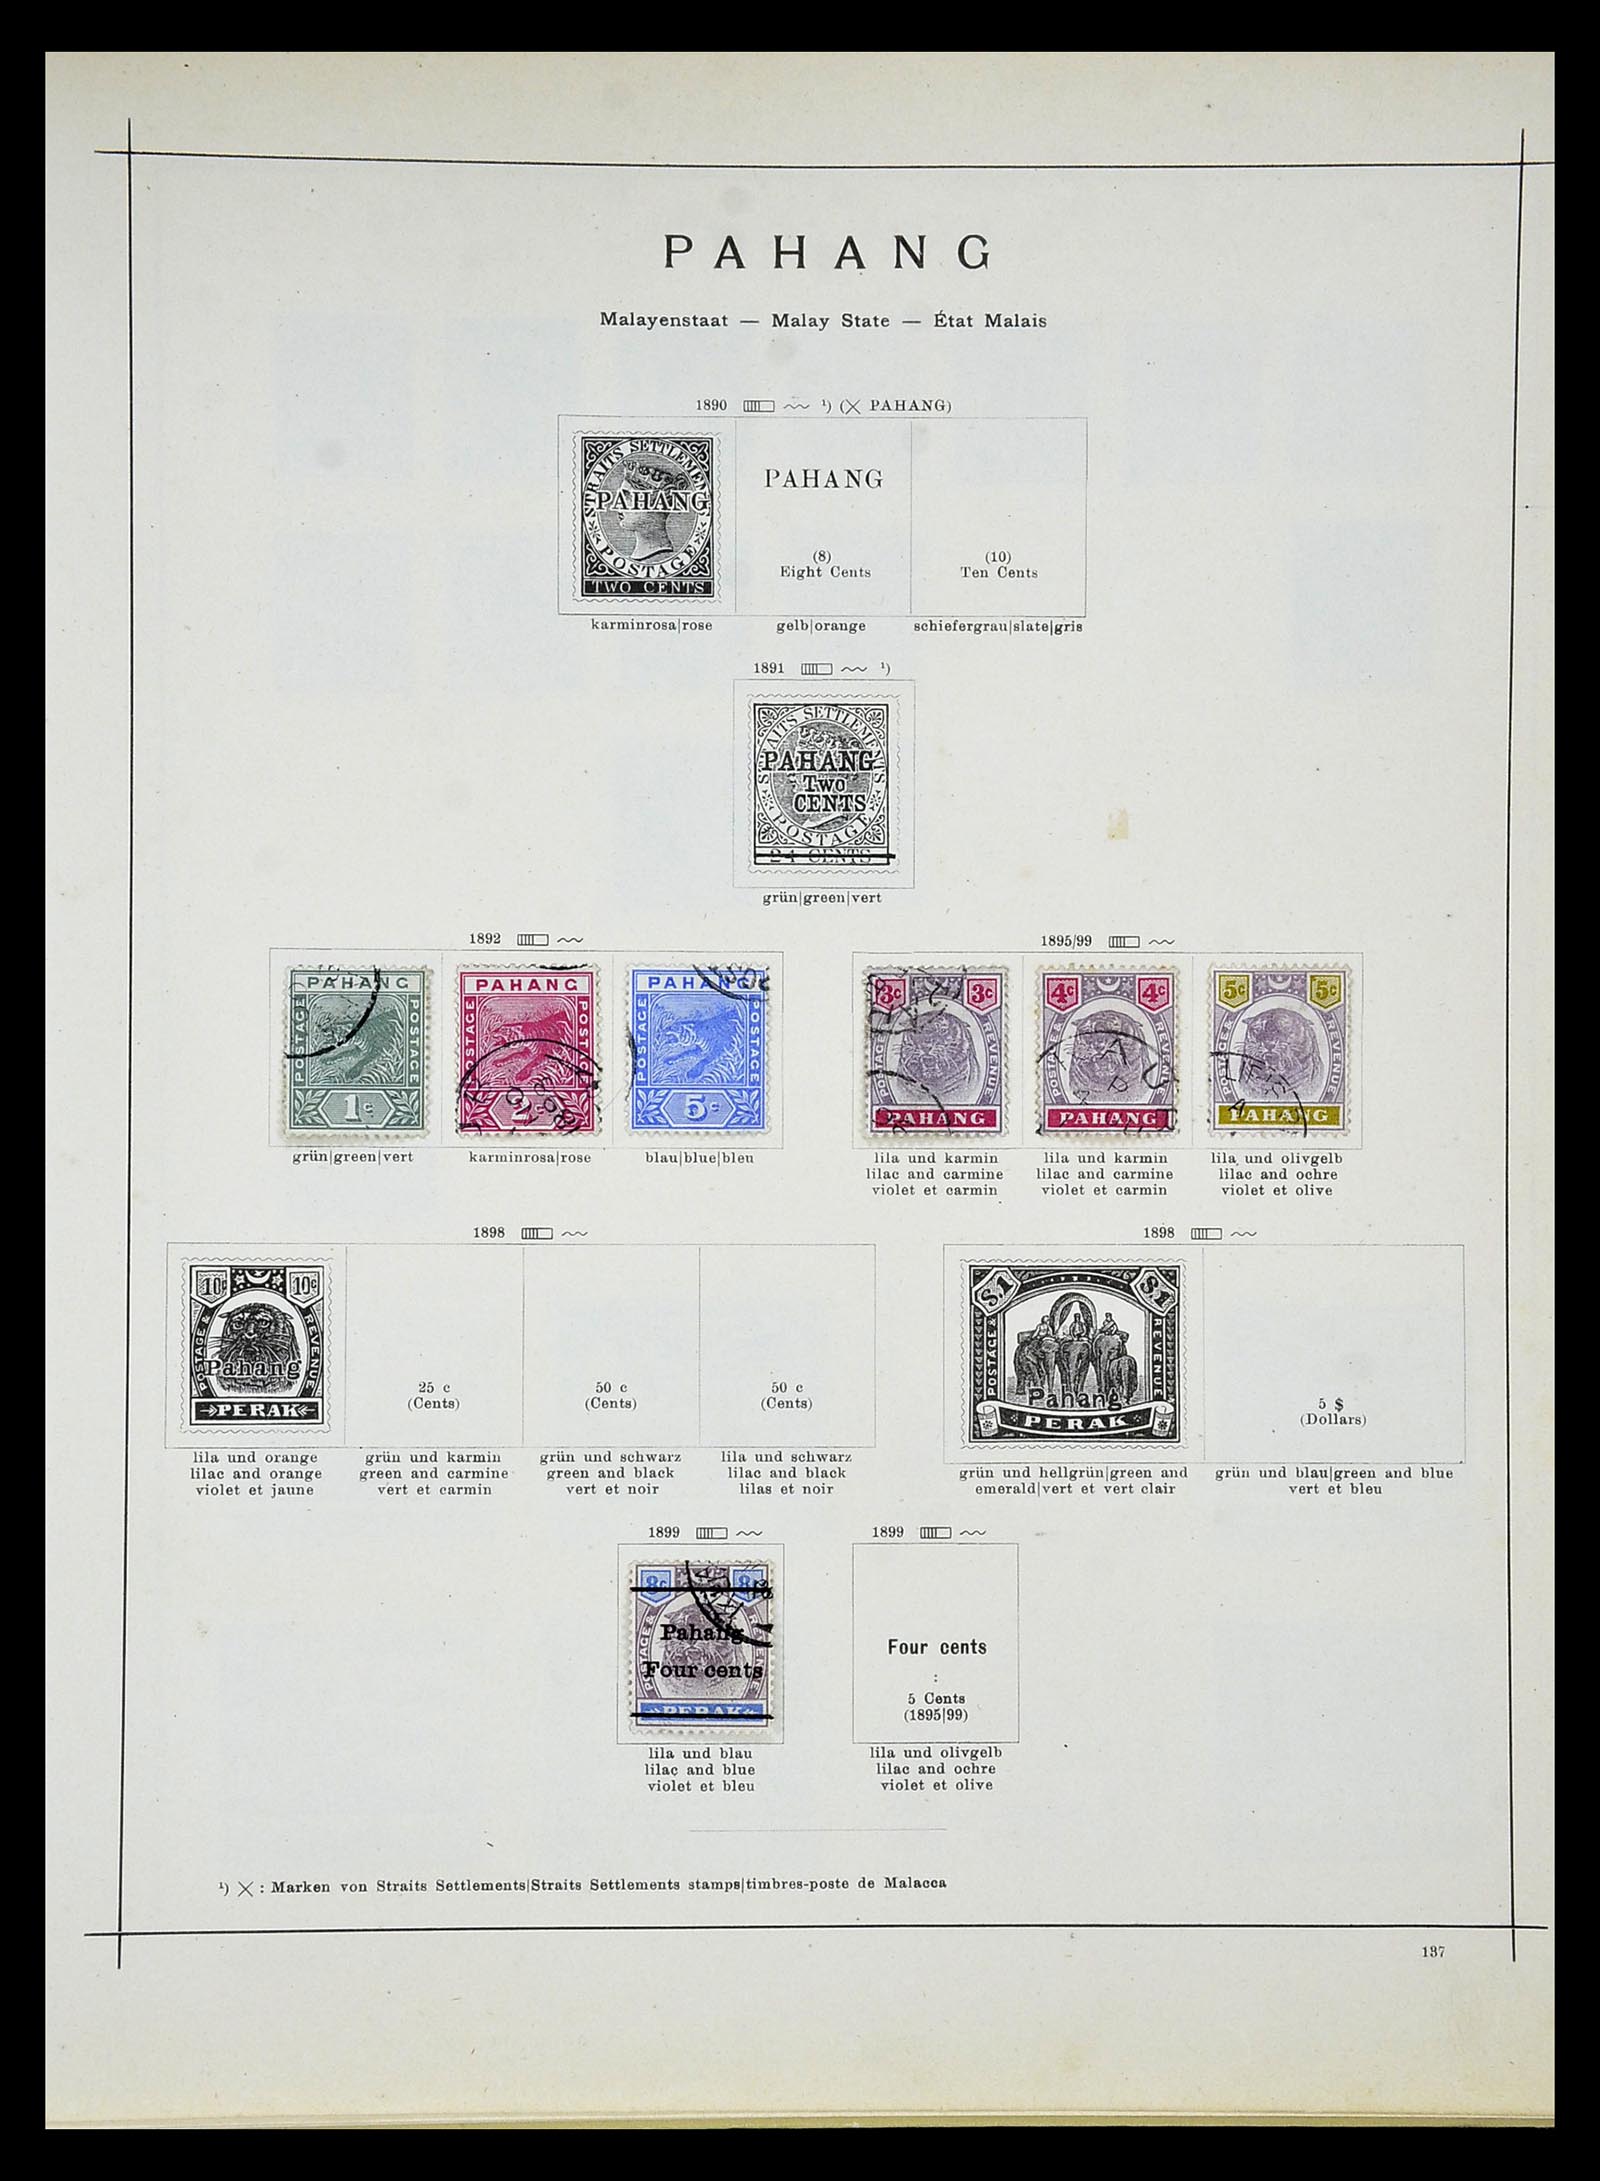 34892 024 - Stamp Collection 34892 Straits Settlements, Malaysia and Singapore 1868-